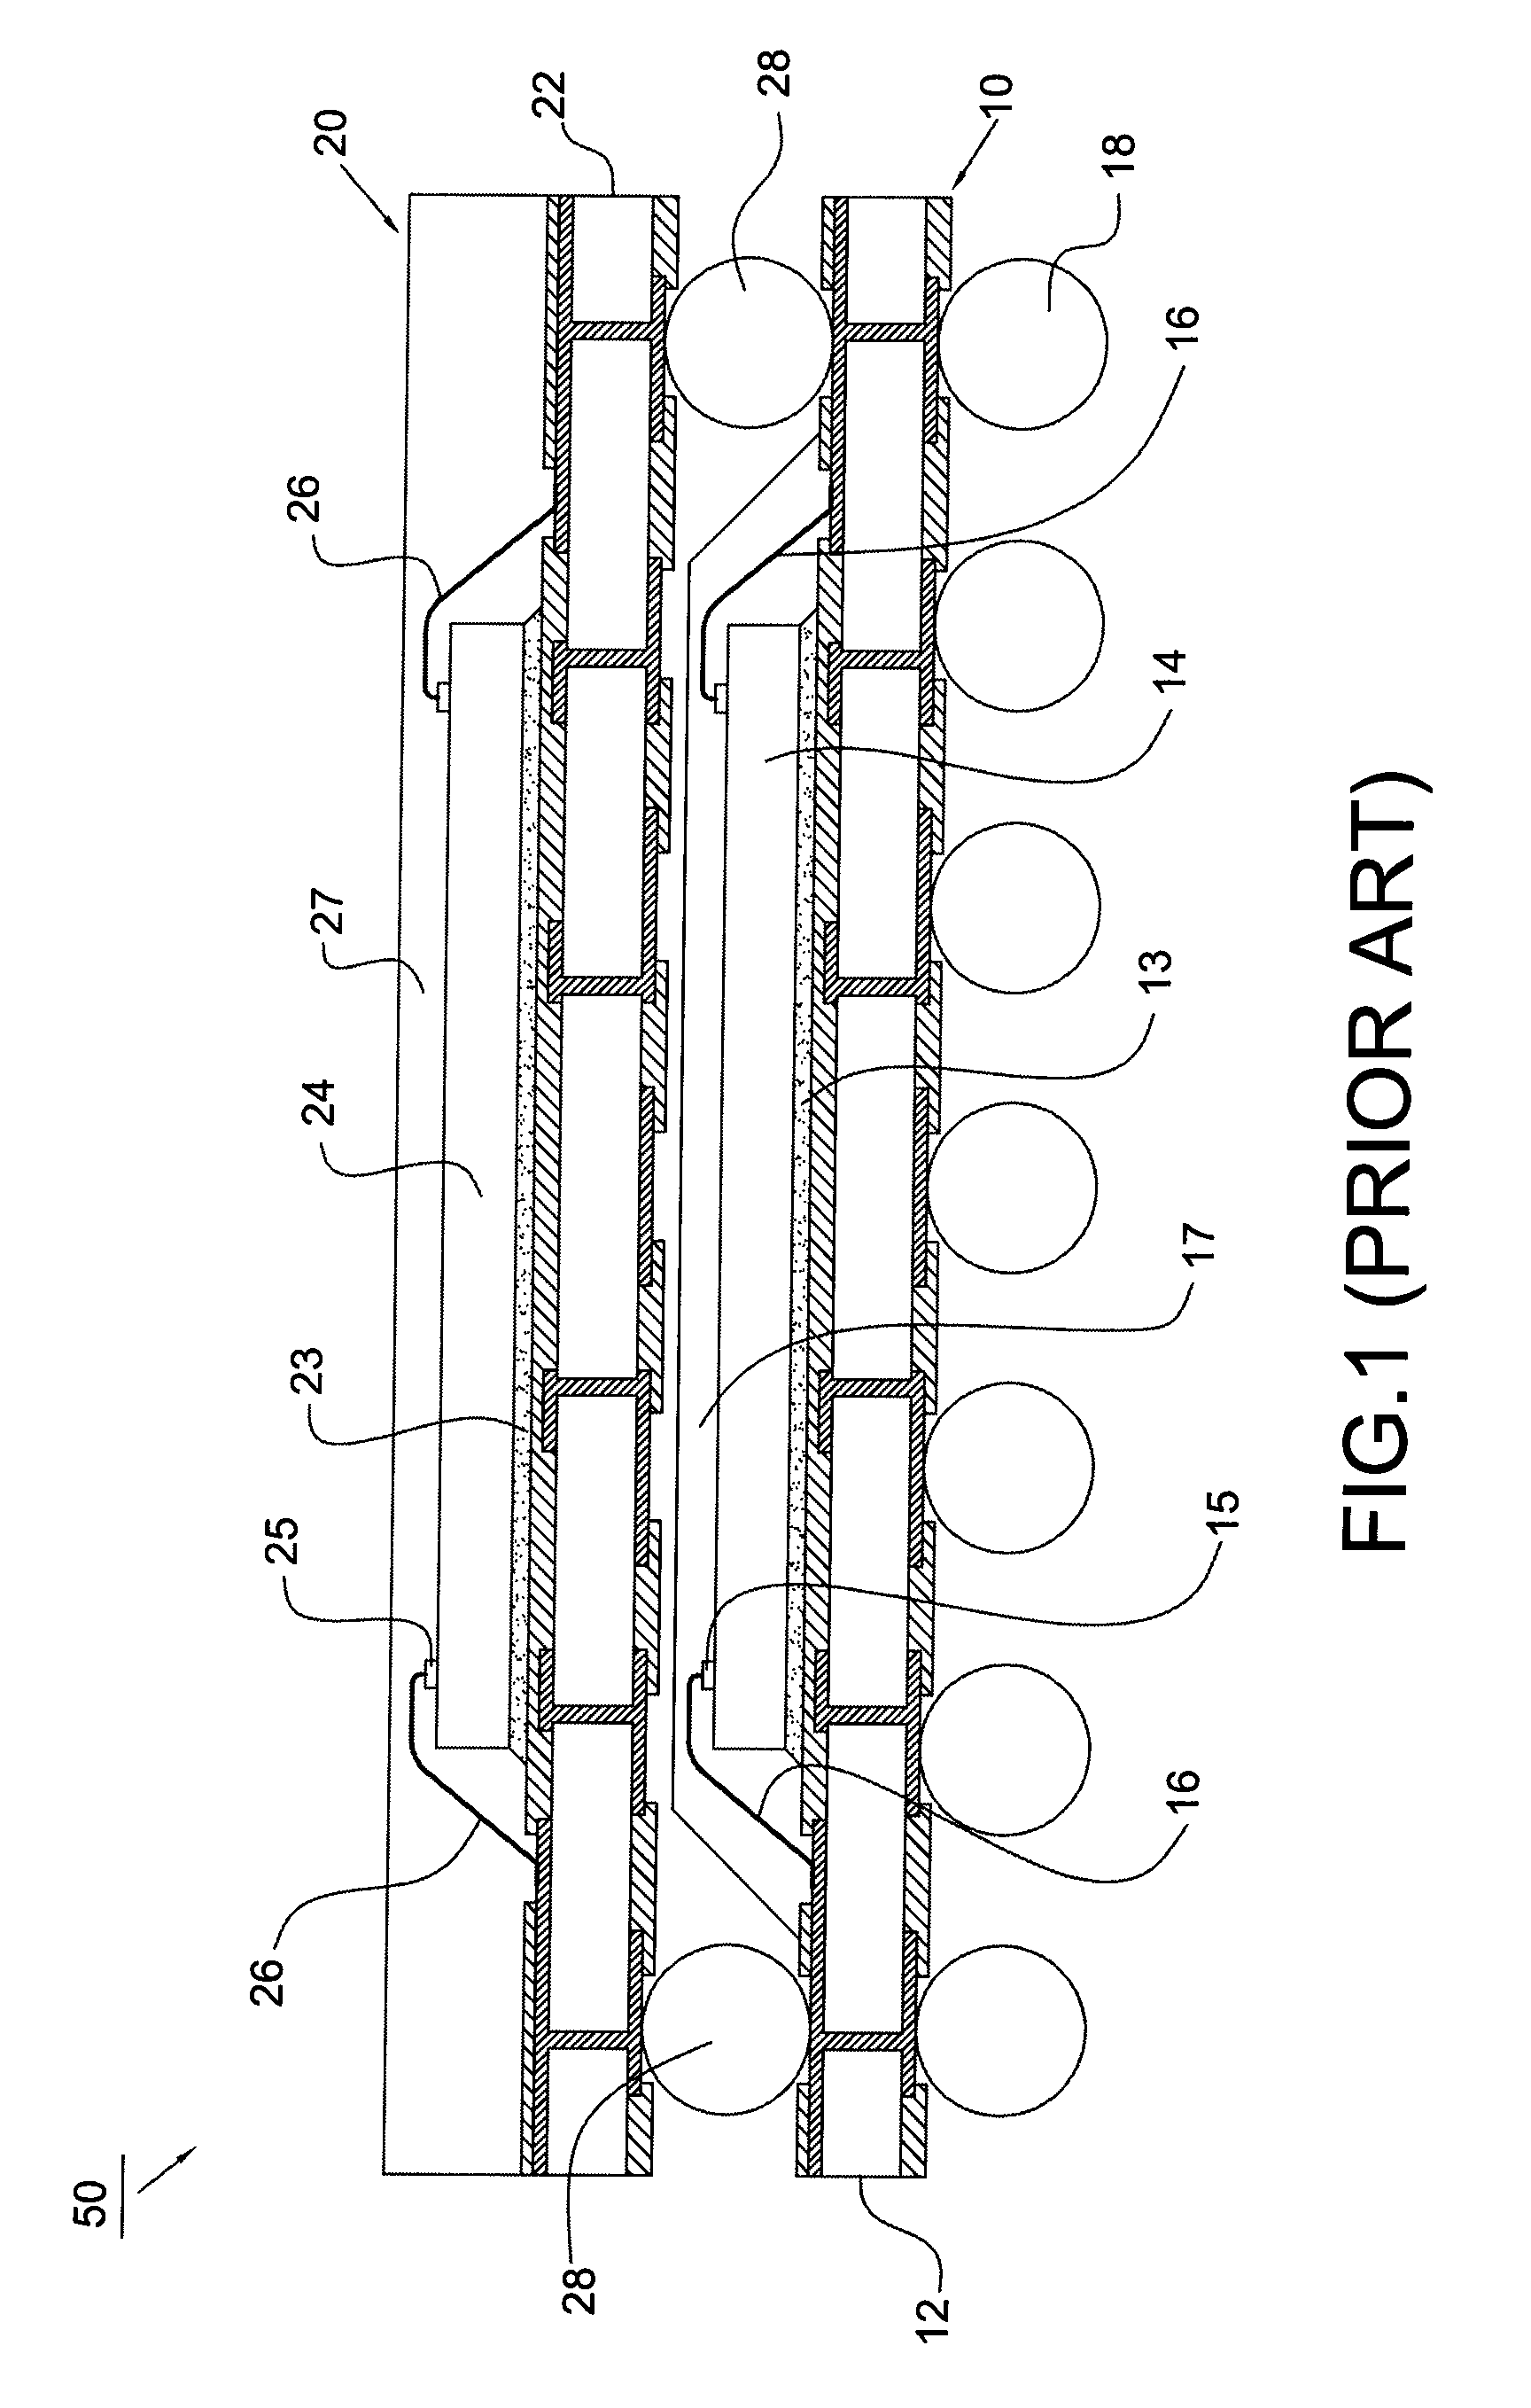 Package-on-package device, semiconductor package and method for manufacturing the same